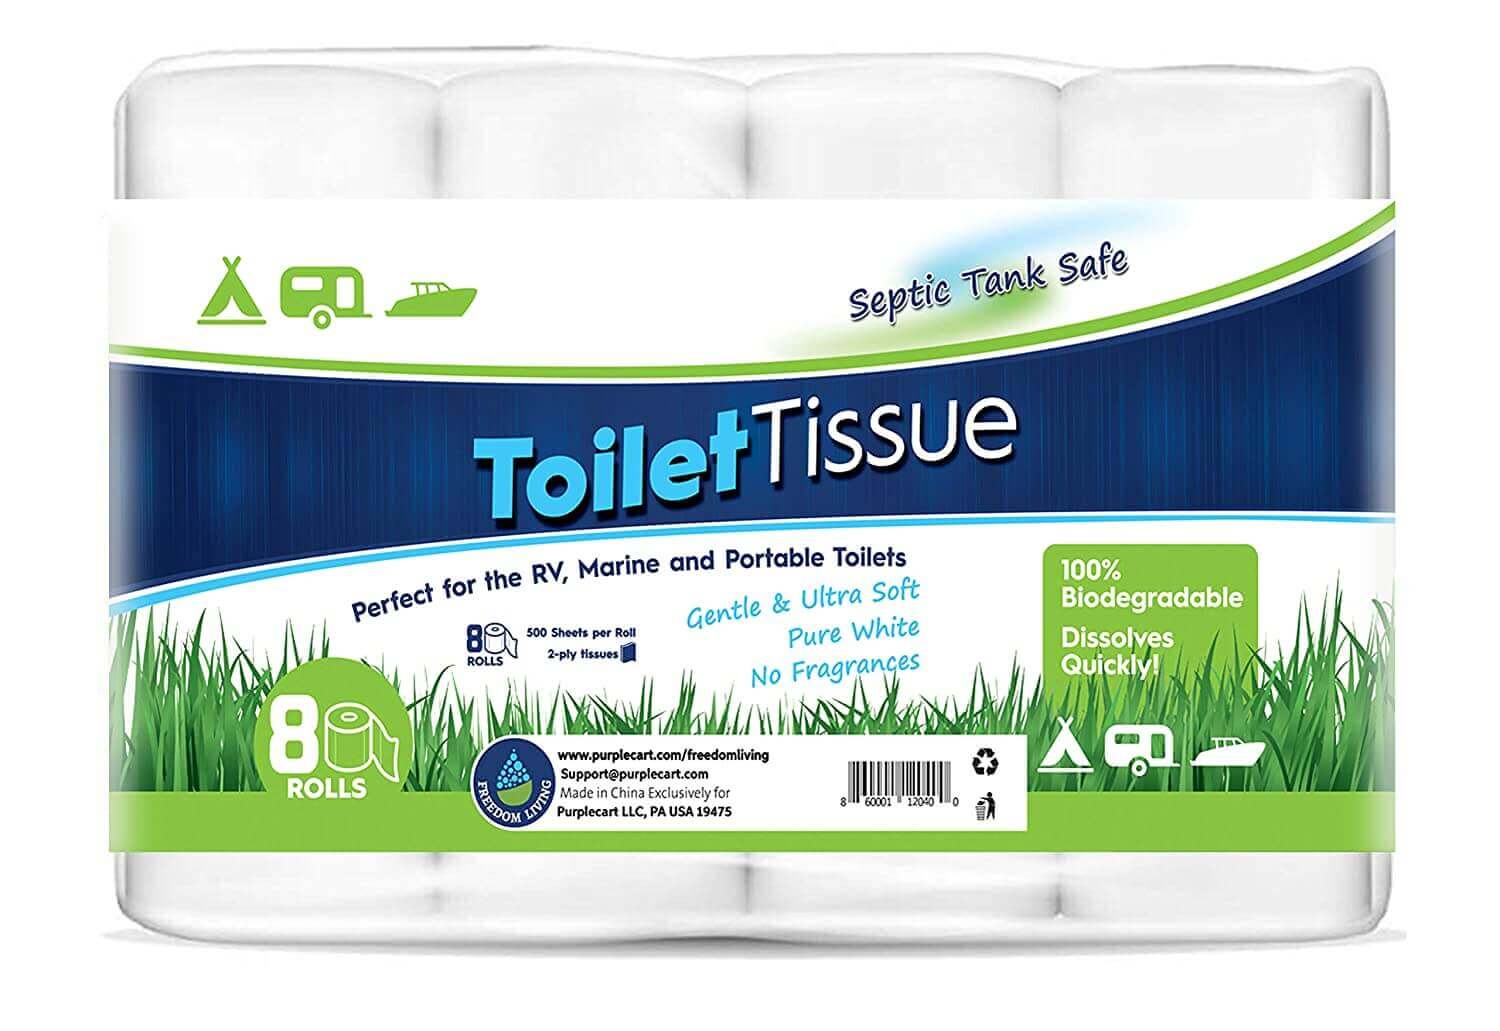 Freedom Living RV Septic Safe Toilet Paper